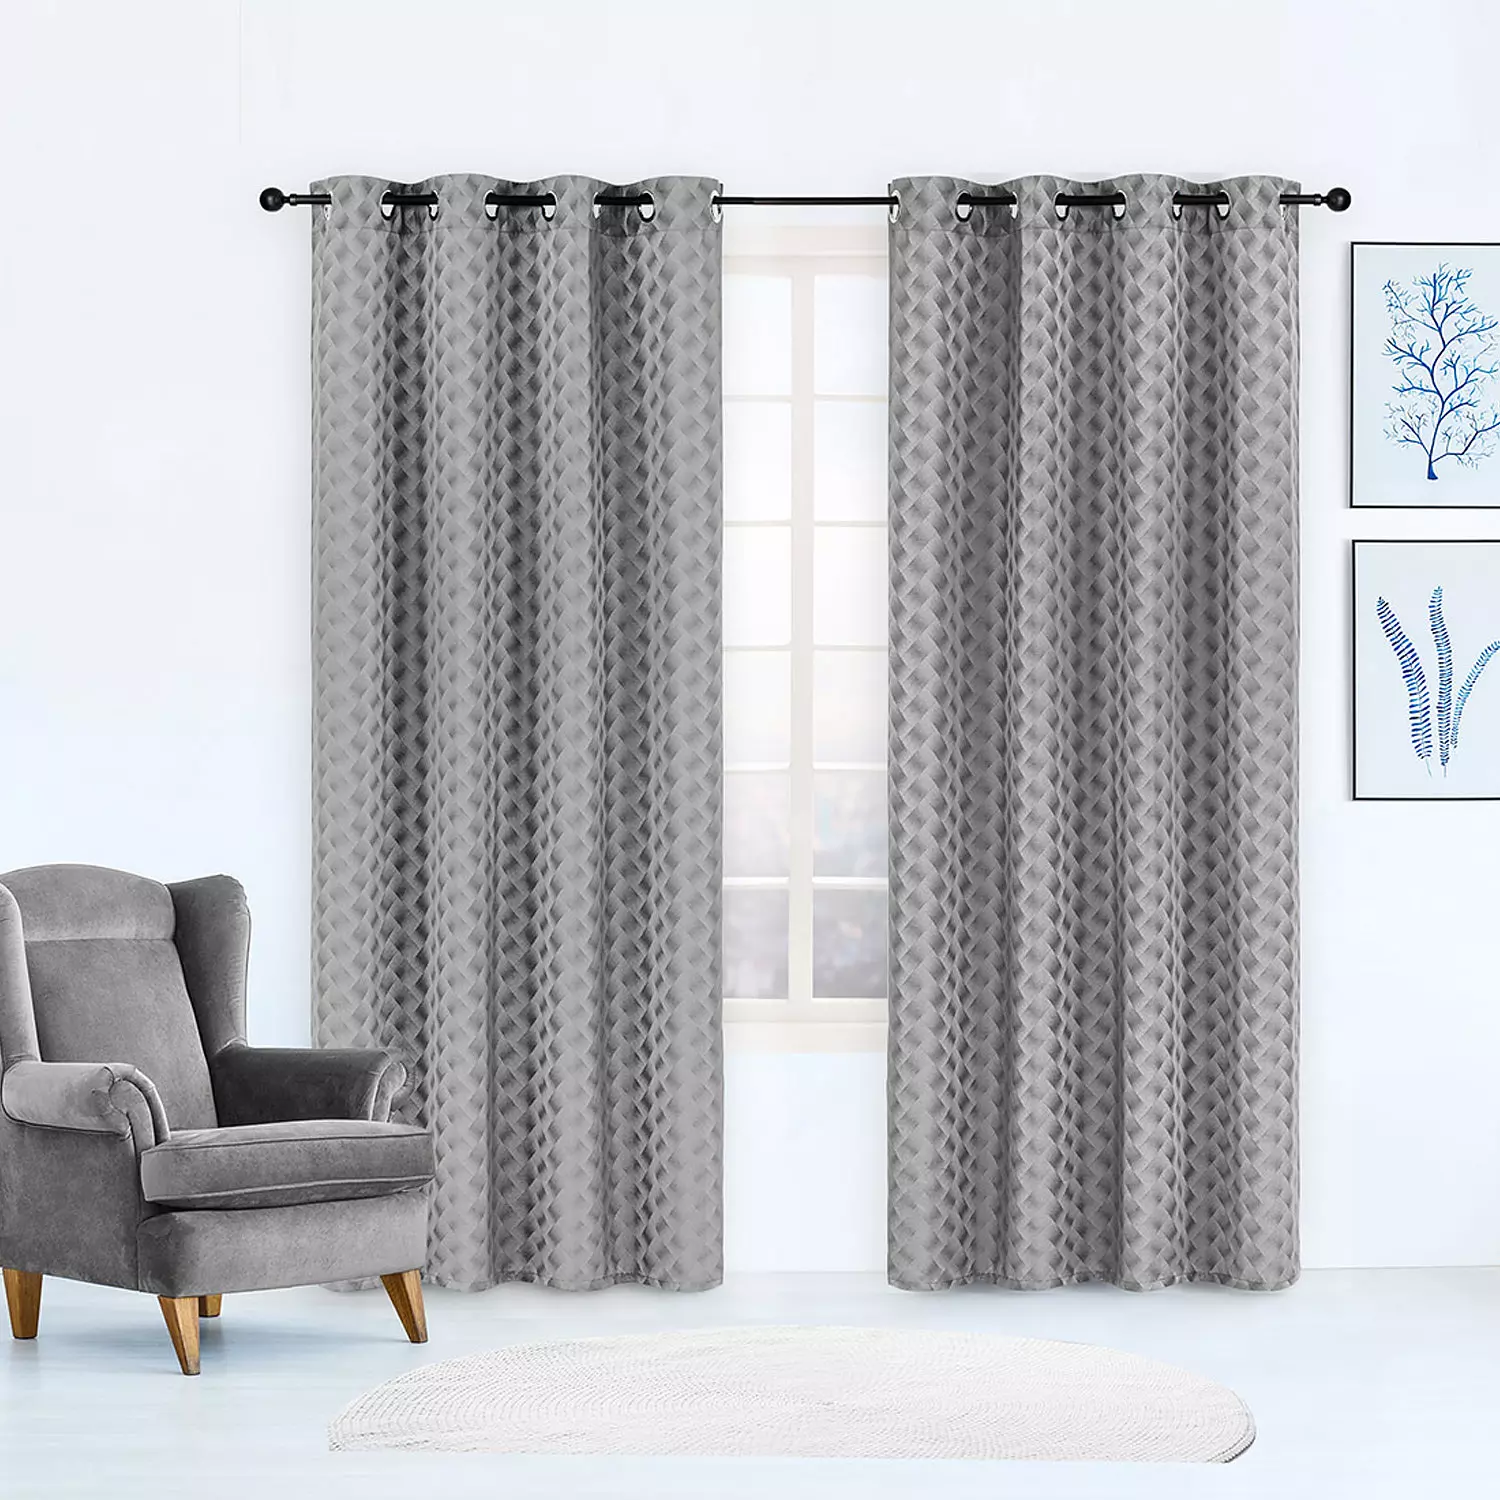 Jacquard panel with metal grommets in a gradient diamond pattern, 54"x84", grey